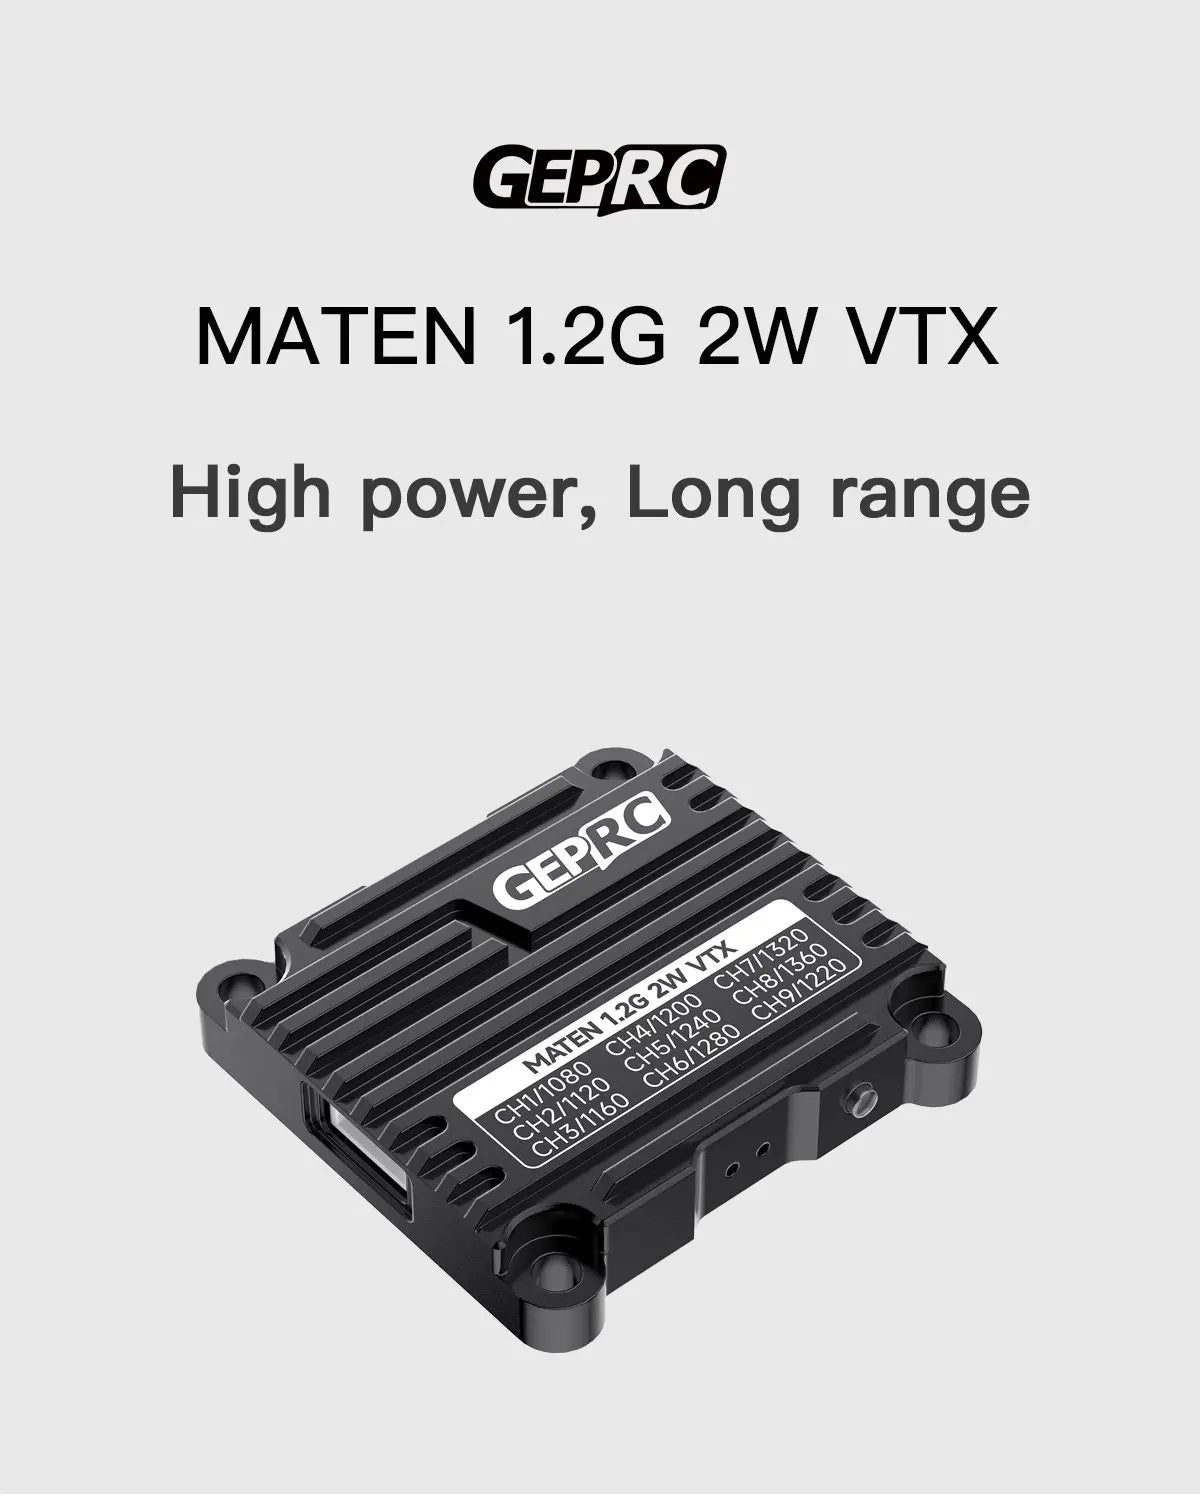 GEPRC MATEN 1.2G 2W VTX, to prevent overheating,provide constant airflow and a well ventilated environment 